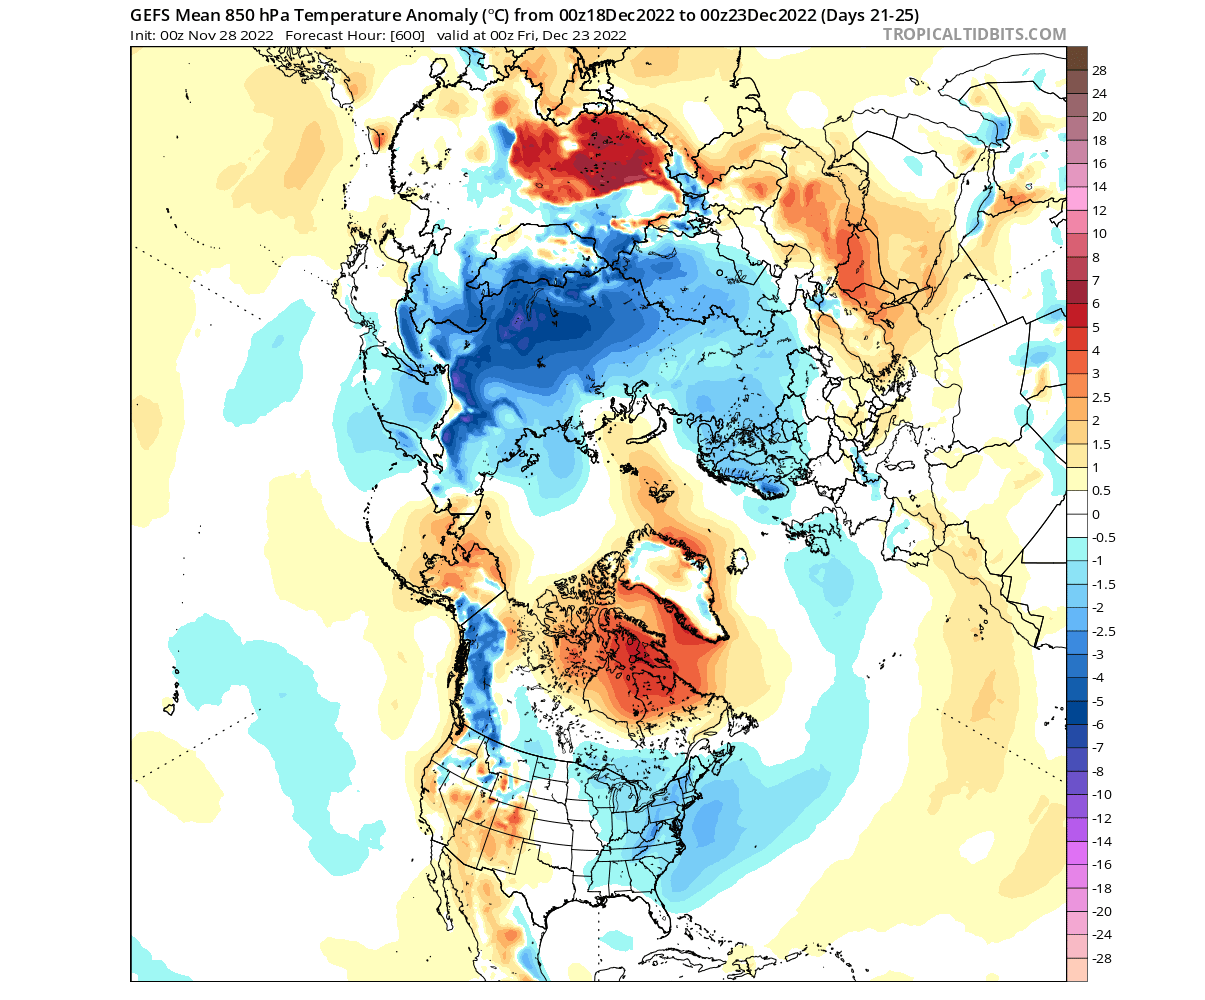 noaa-weather-extended-forecast-december-2022-united-states-temperature-anomaly-end-month